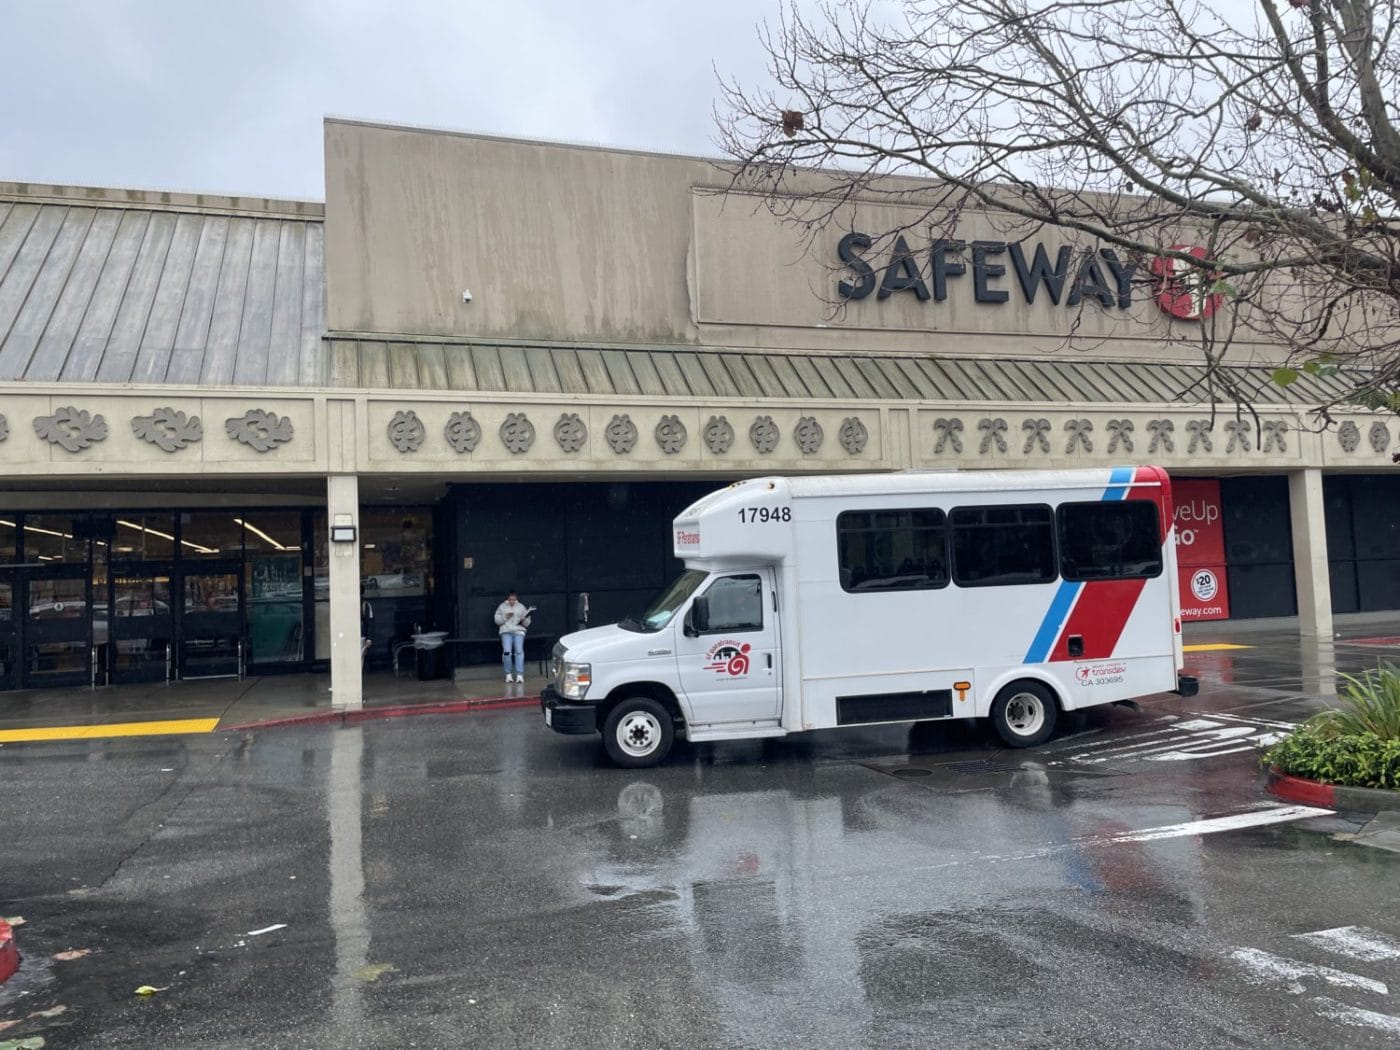 Fillmore-Safeway-ParaTransit-out-front-by-Daphne-Young-1400x1050, Fillmore Safeway remains open, Local News & Views 